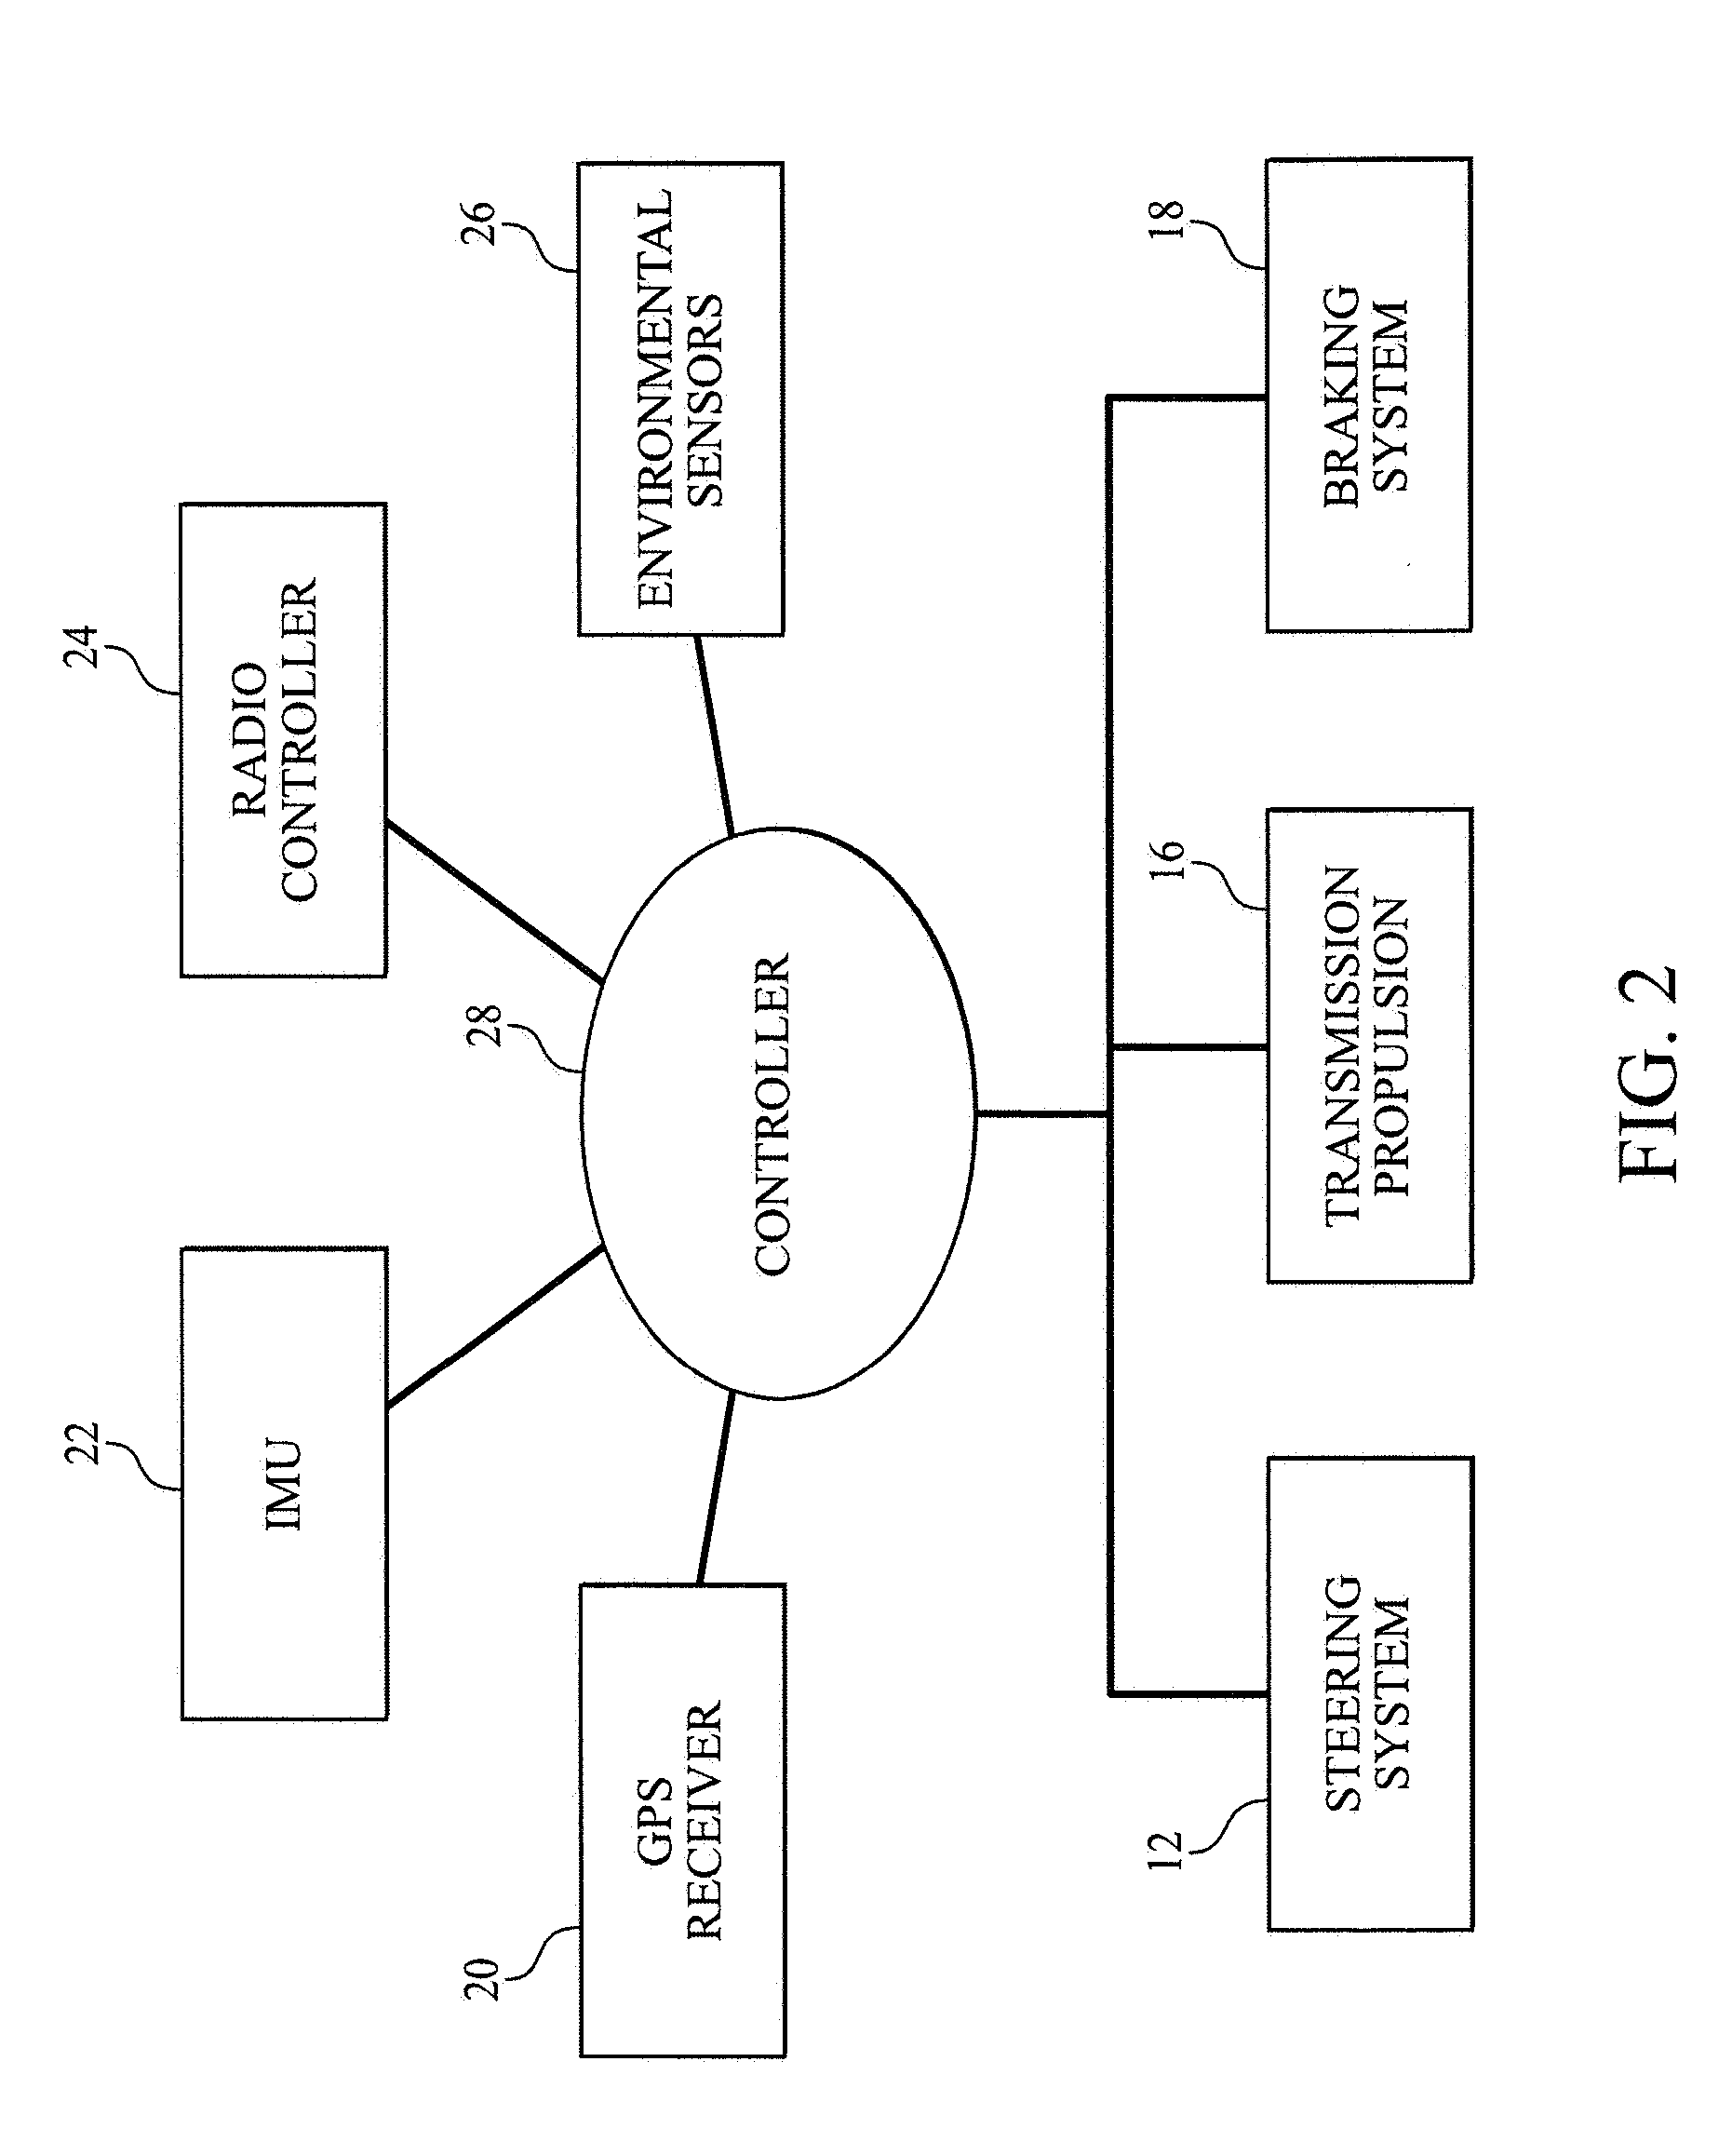 System and method for autonomously convoying vehicles